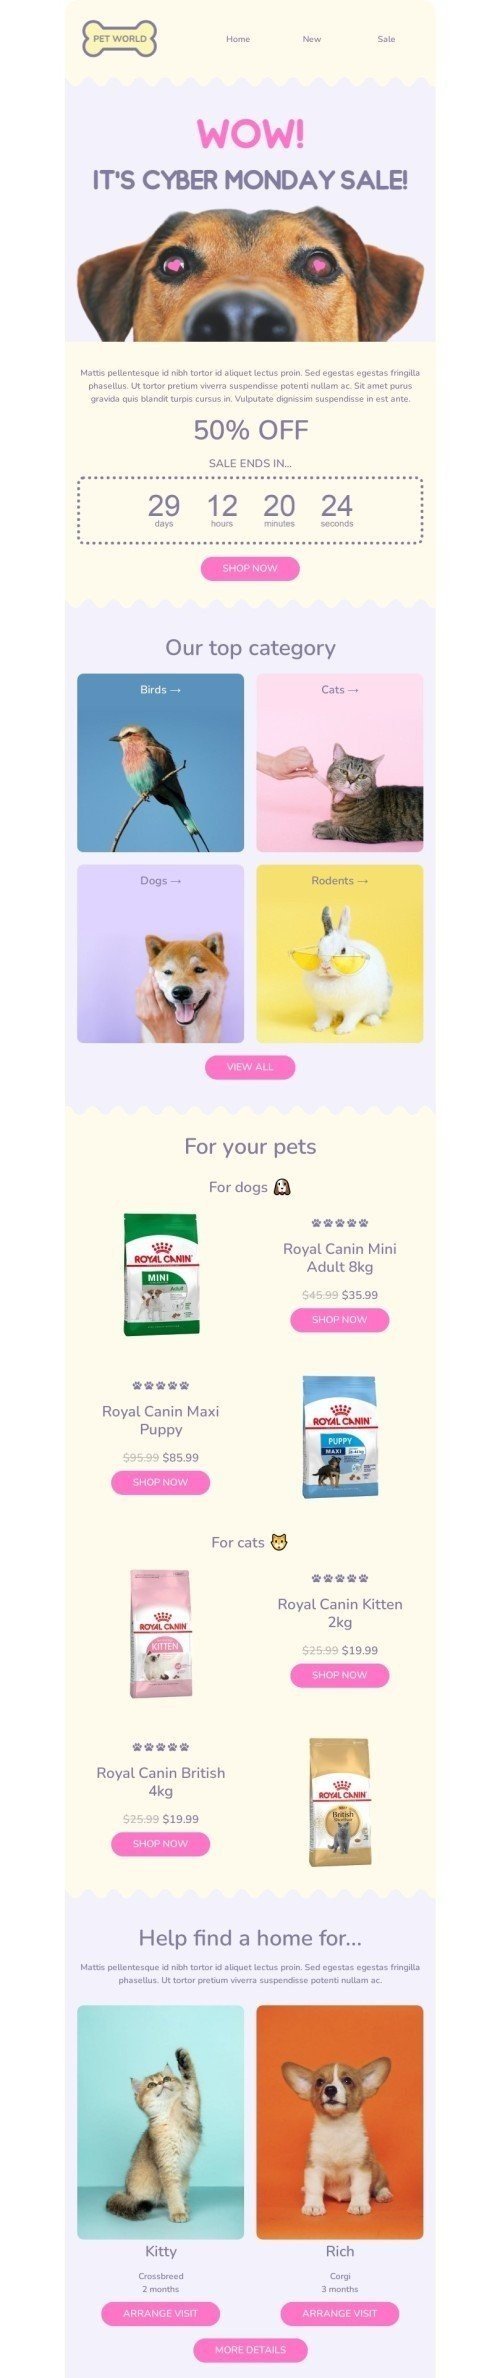 Cyber Monday email template "Cyber Monday sale" for pets industry desktop view